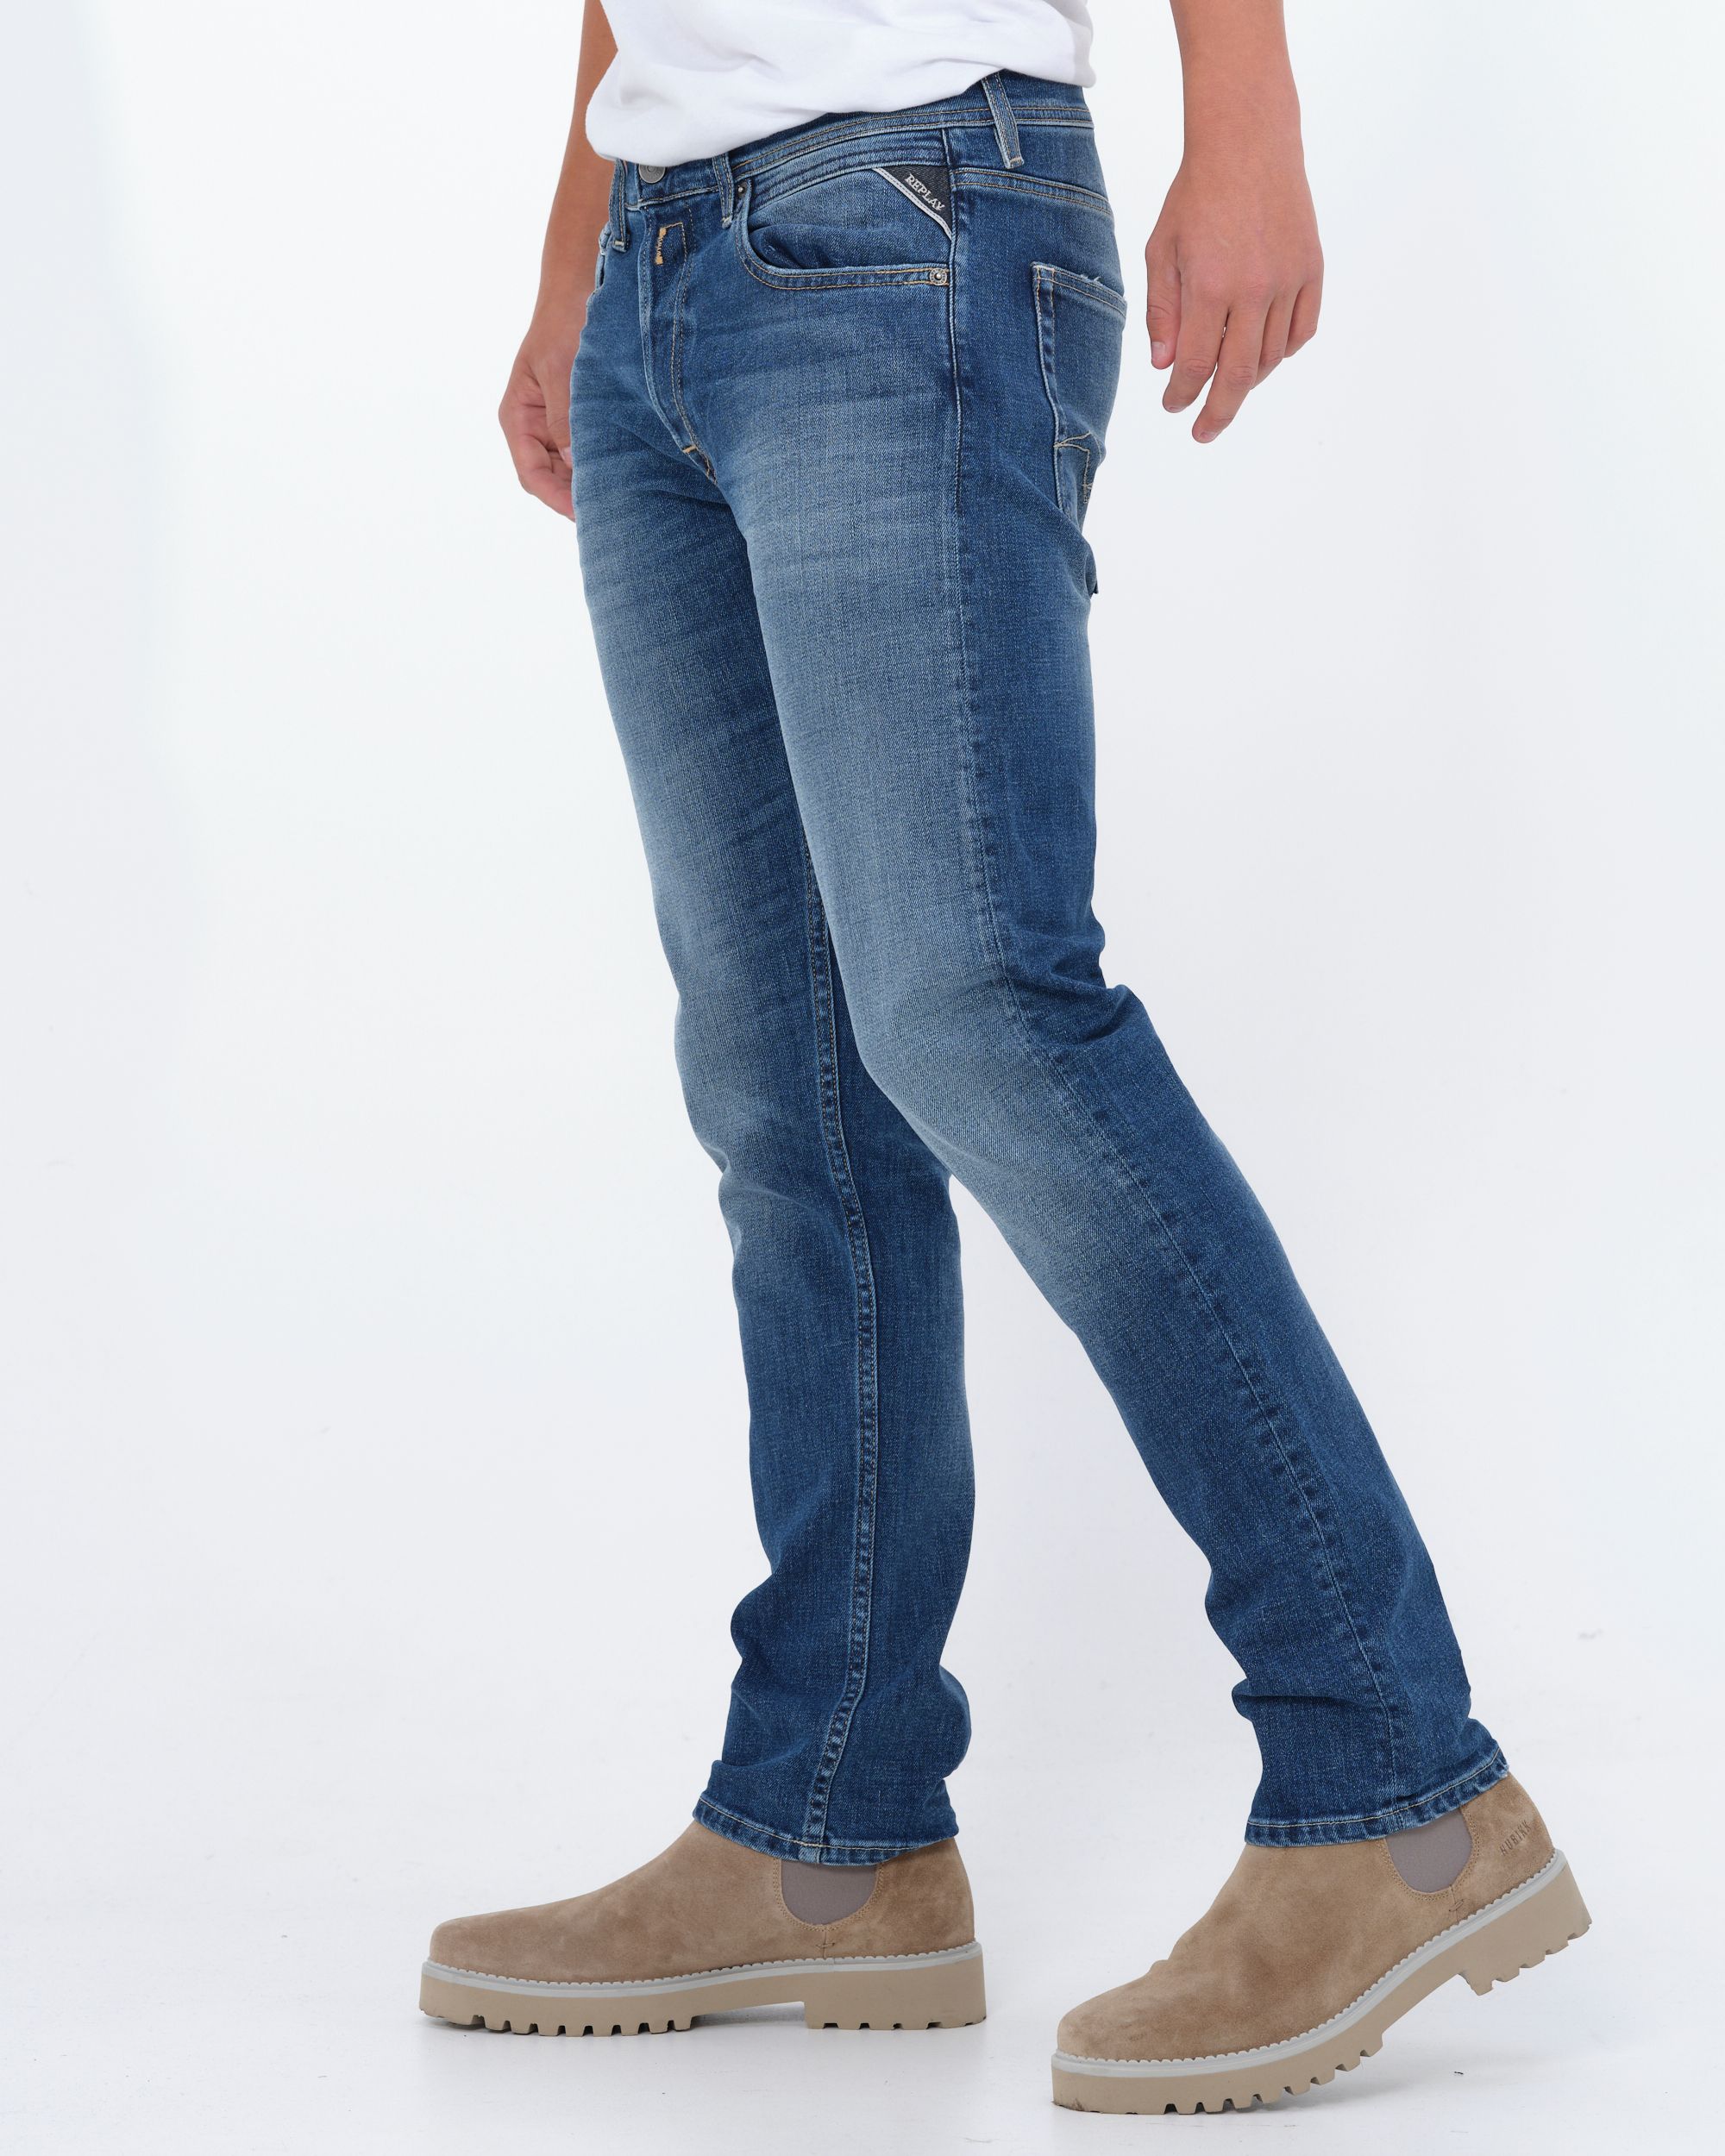 Replay Grover Jeans Blauw 081755-001-34/34